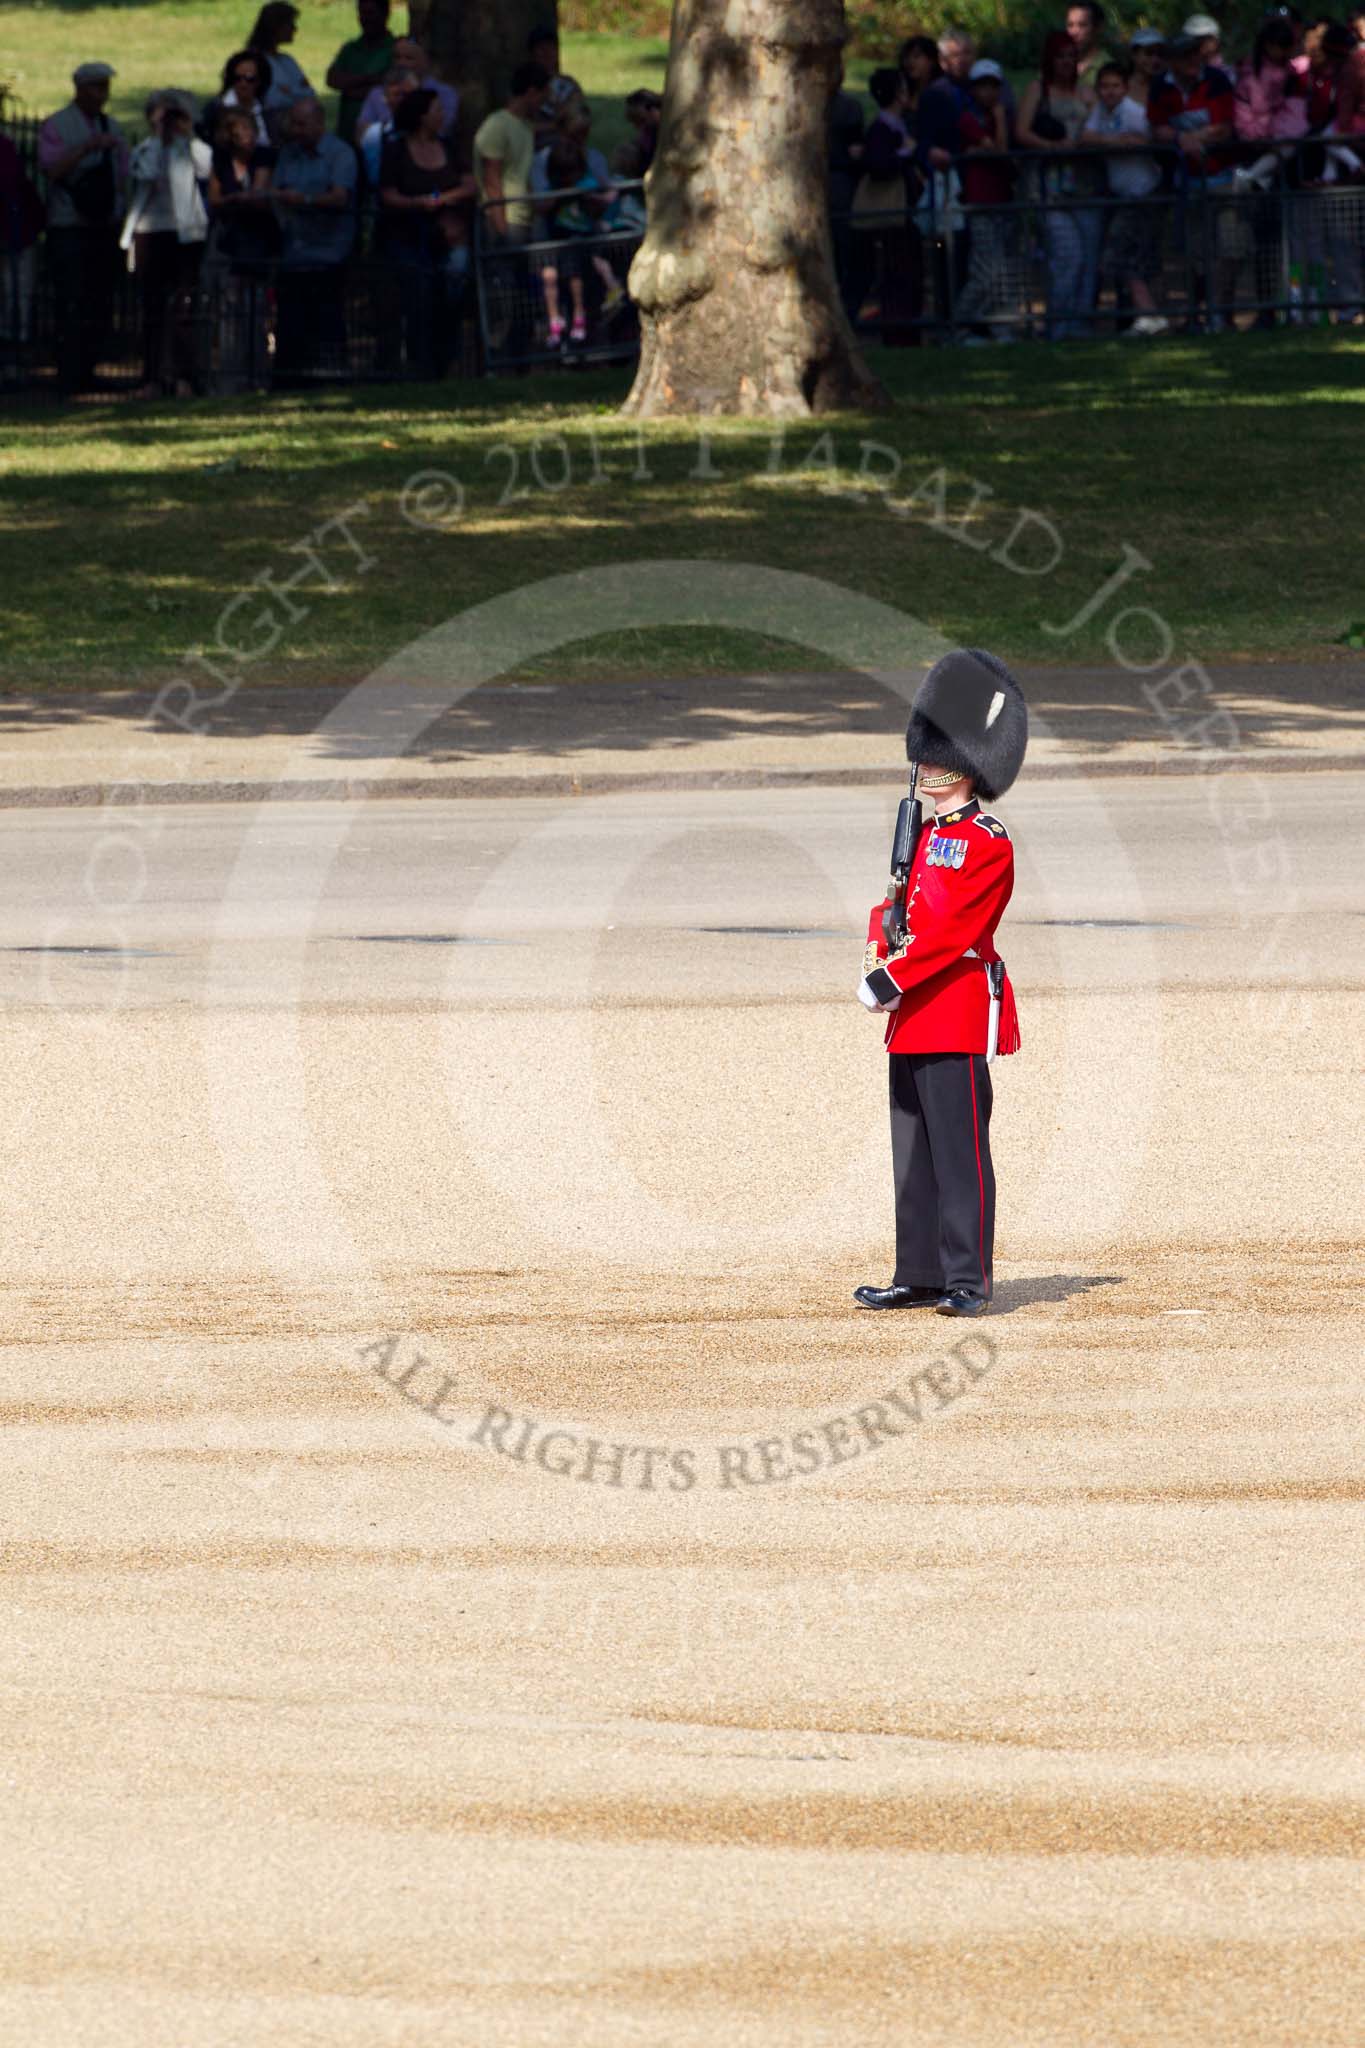 The Colonel's Review 2011: Guardsman from the Grenadier Guards, marking the position for No. 4 Guard (Nijmegen Company Grenadier Guards)..
Horse Guards Parade, Westminster,
London SW1,

United Kingdom,
on 04 June 2011 at 10:20, image #18